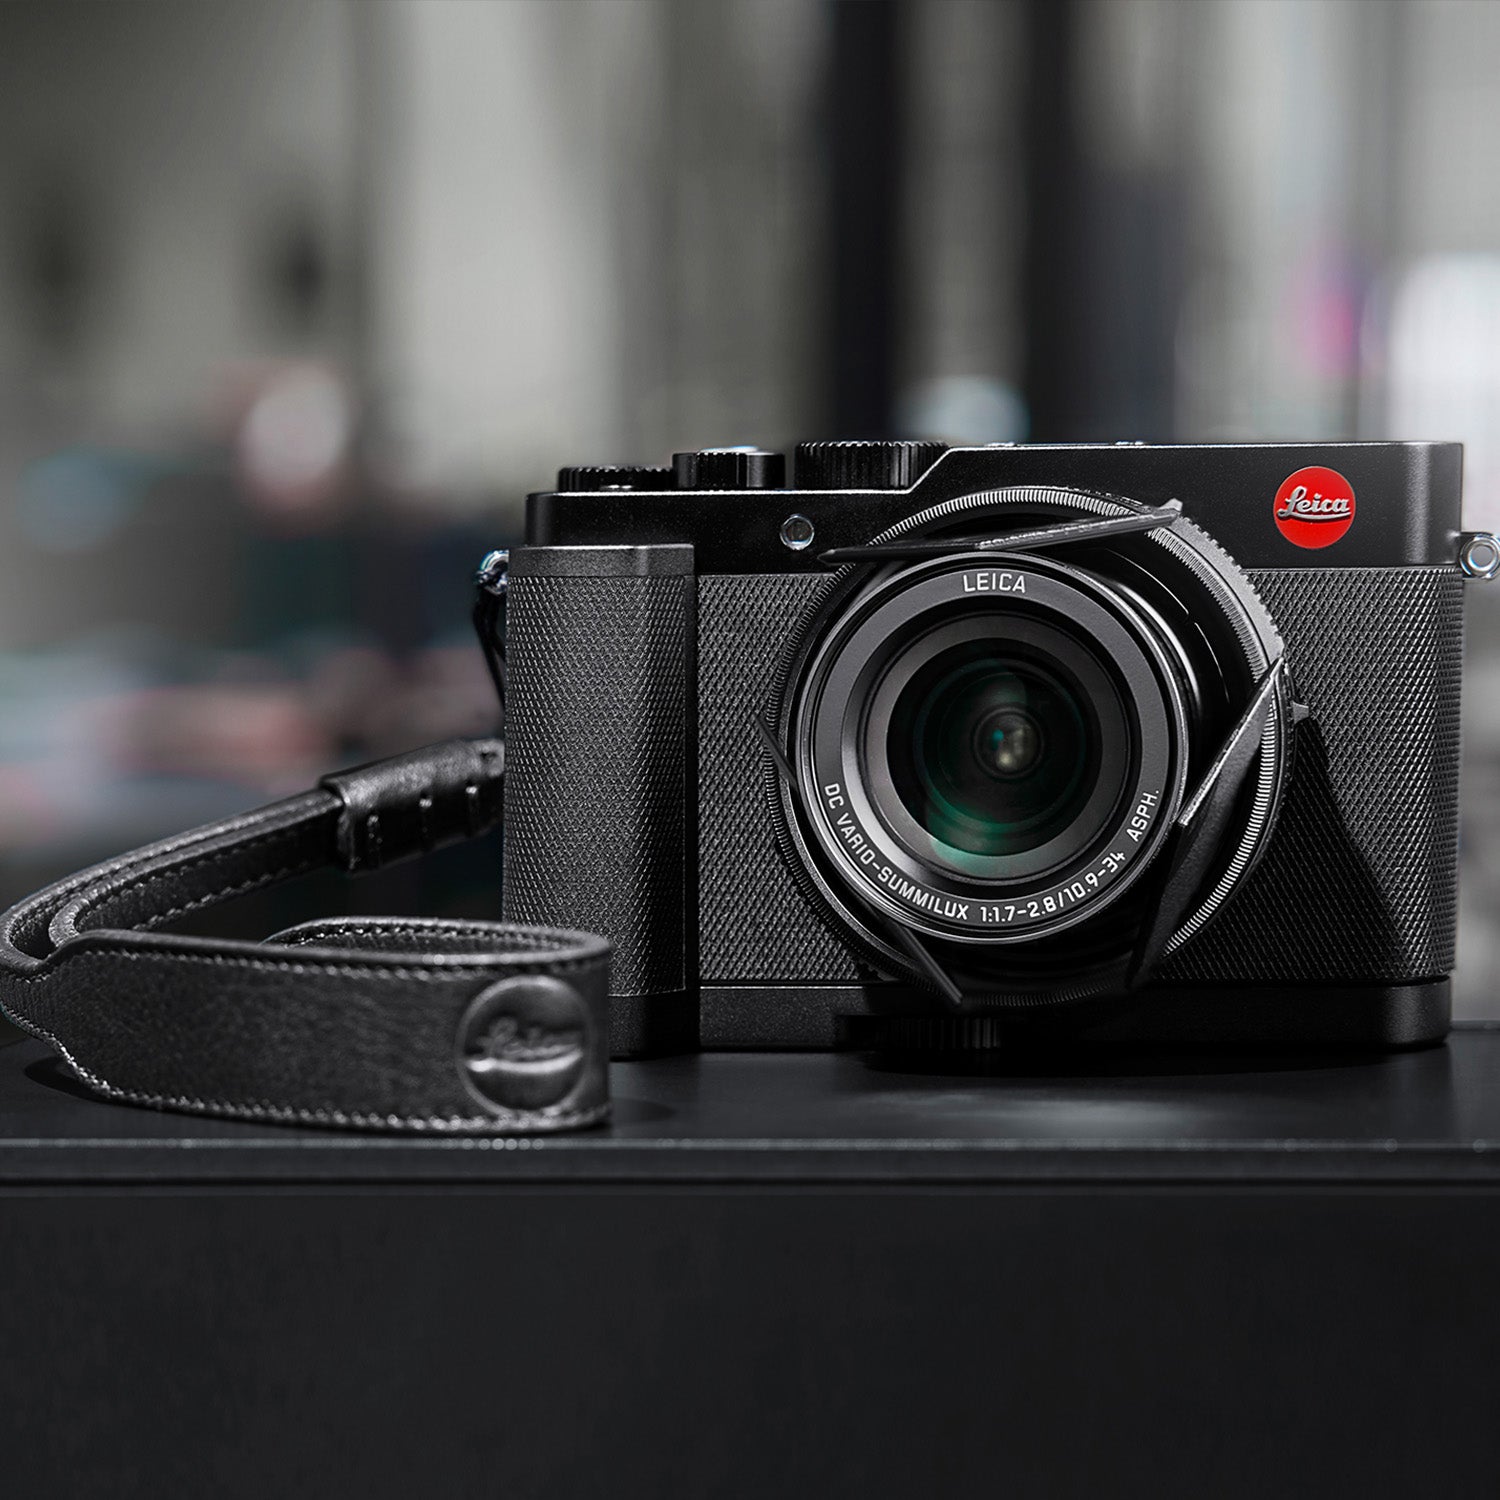 Leica D-Lux 7 review